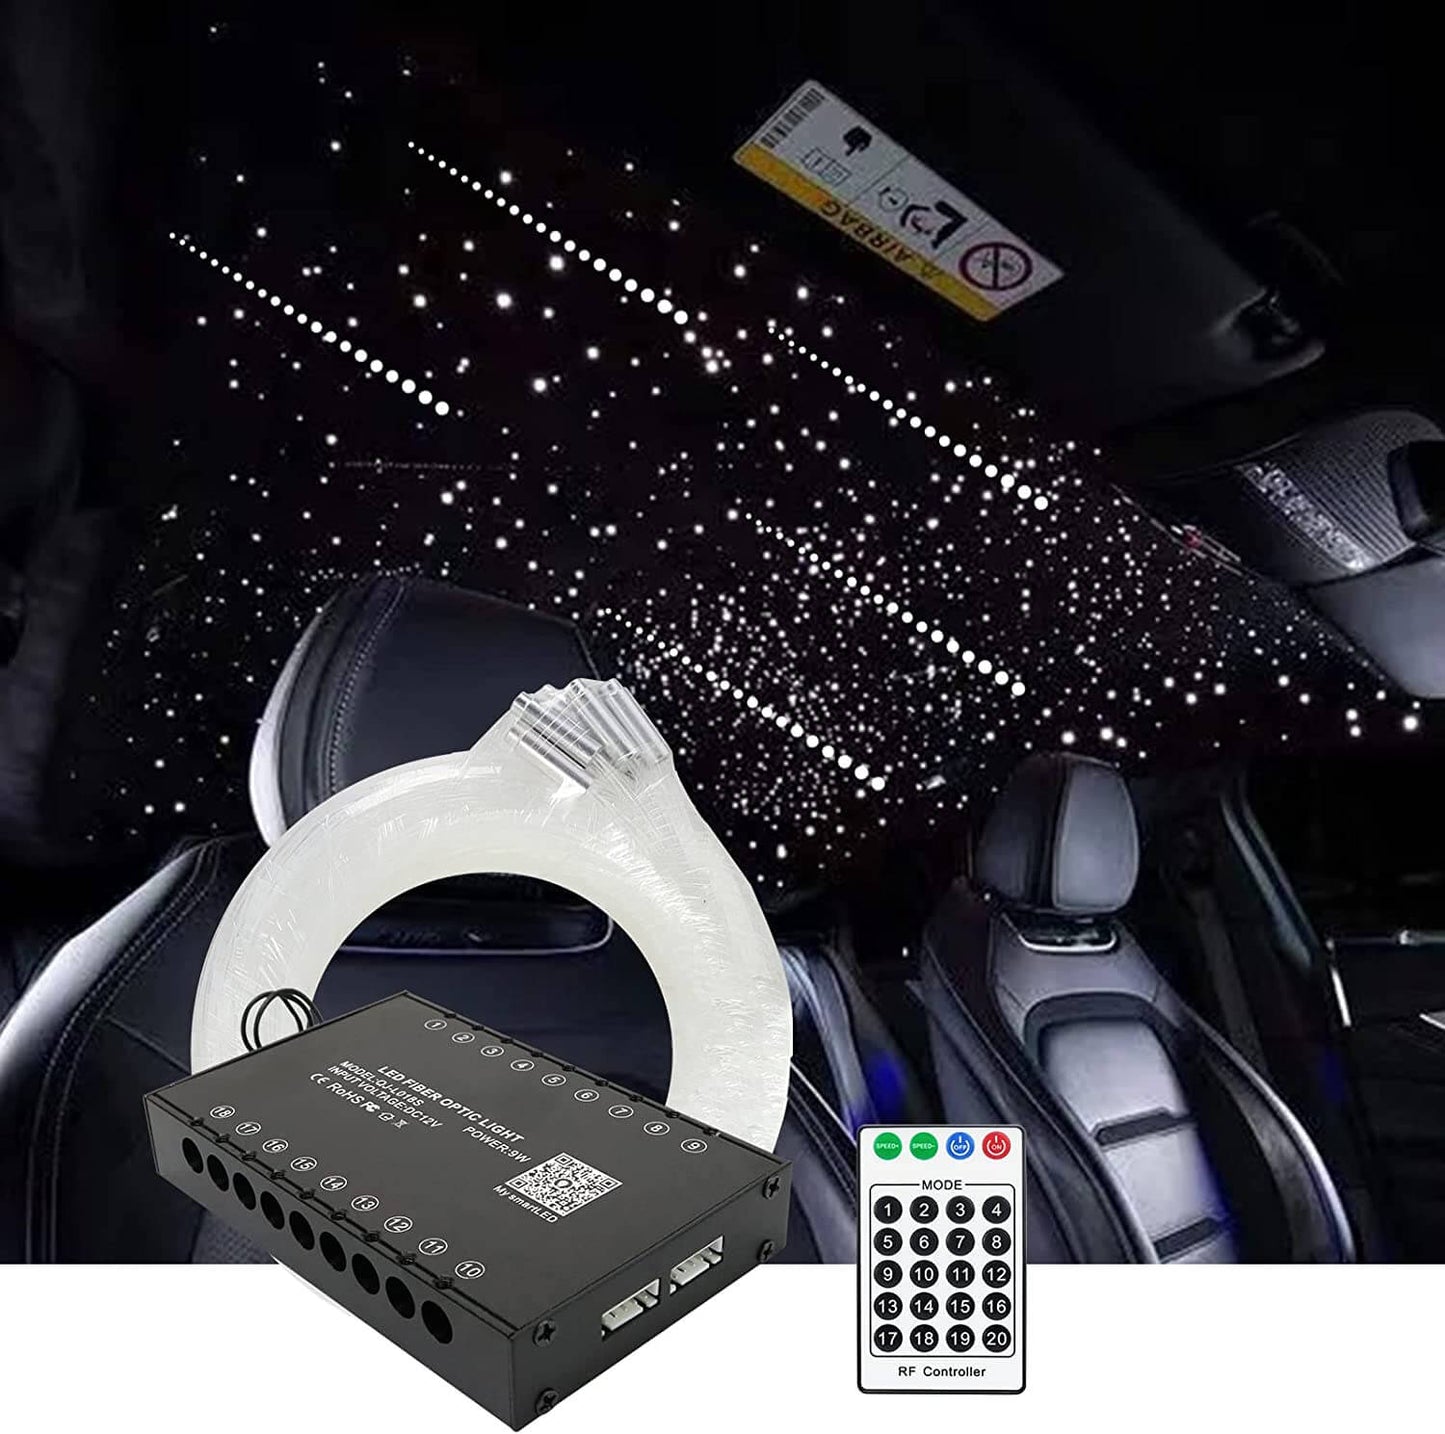 9W White Rolls Royce Roof Lights with Shooting Stars for Car Truck & Home Theater Rooms | STARLIGHTheadliners.shop